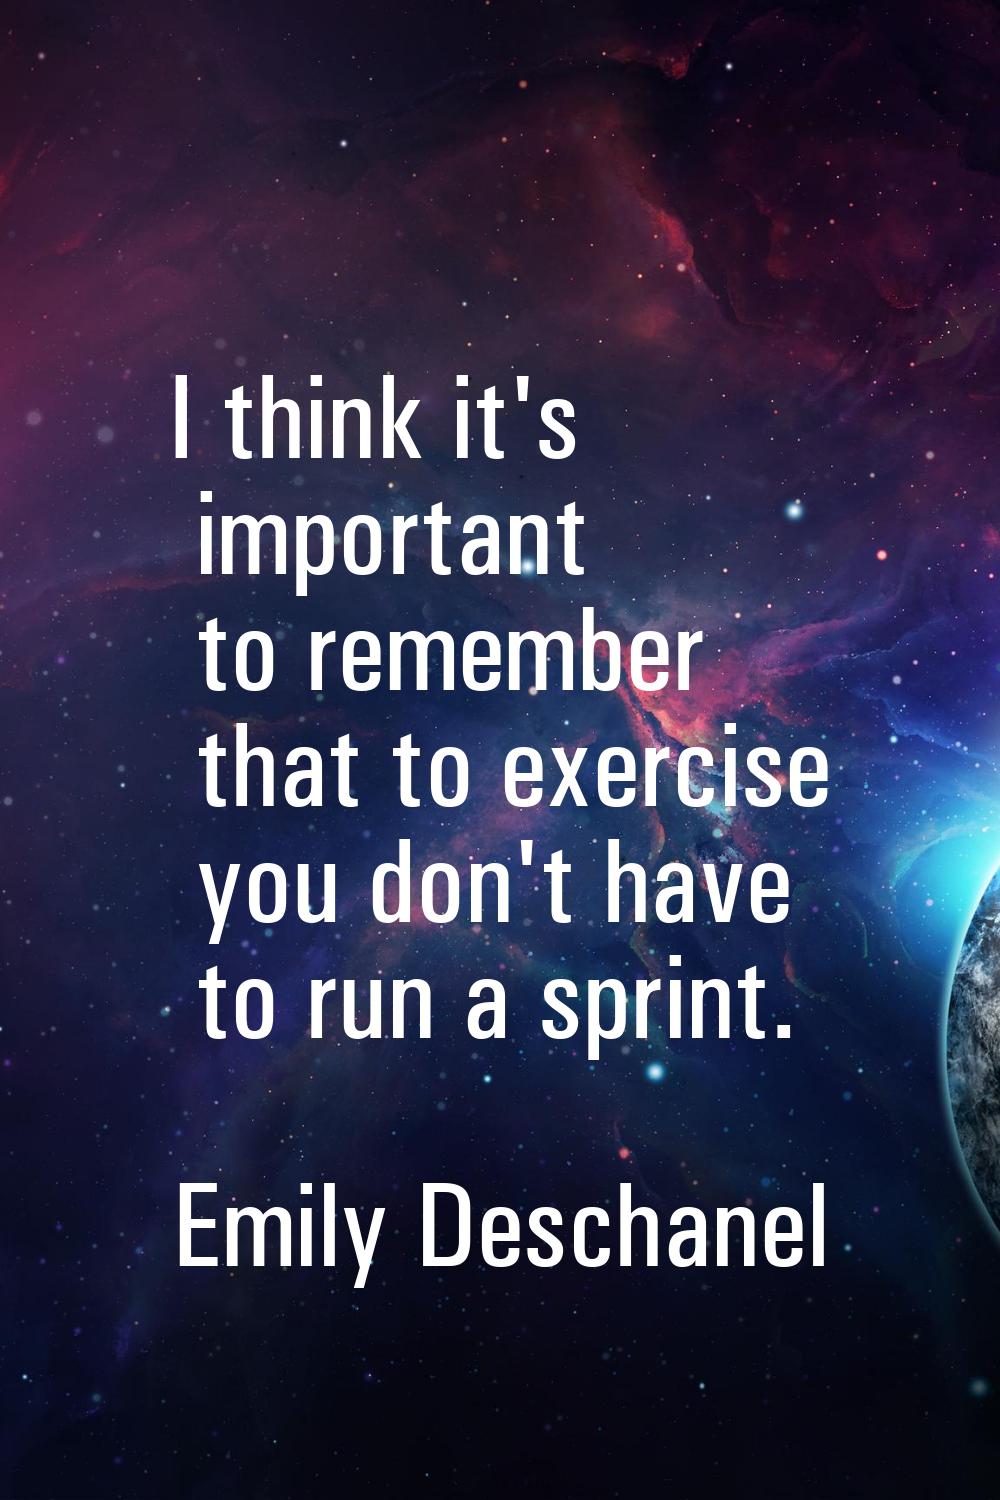 I think it's important to remember that to exercise you don't have to run a sprint.